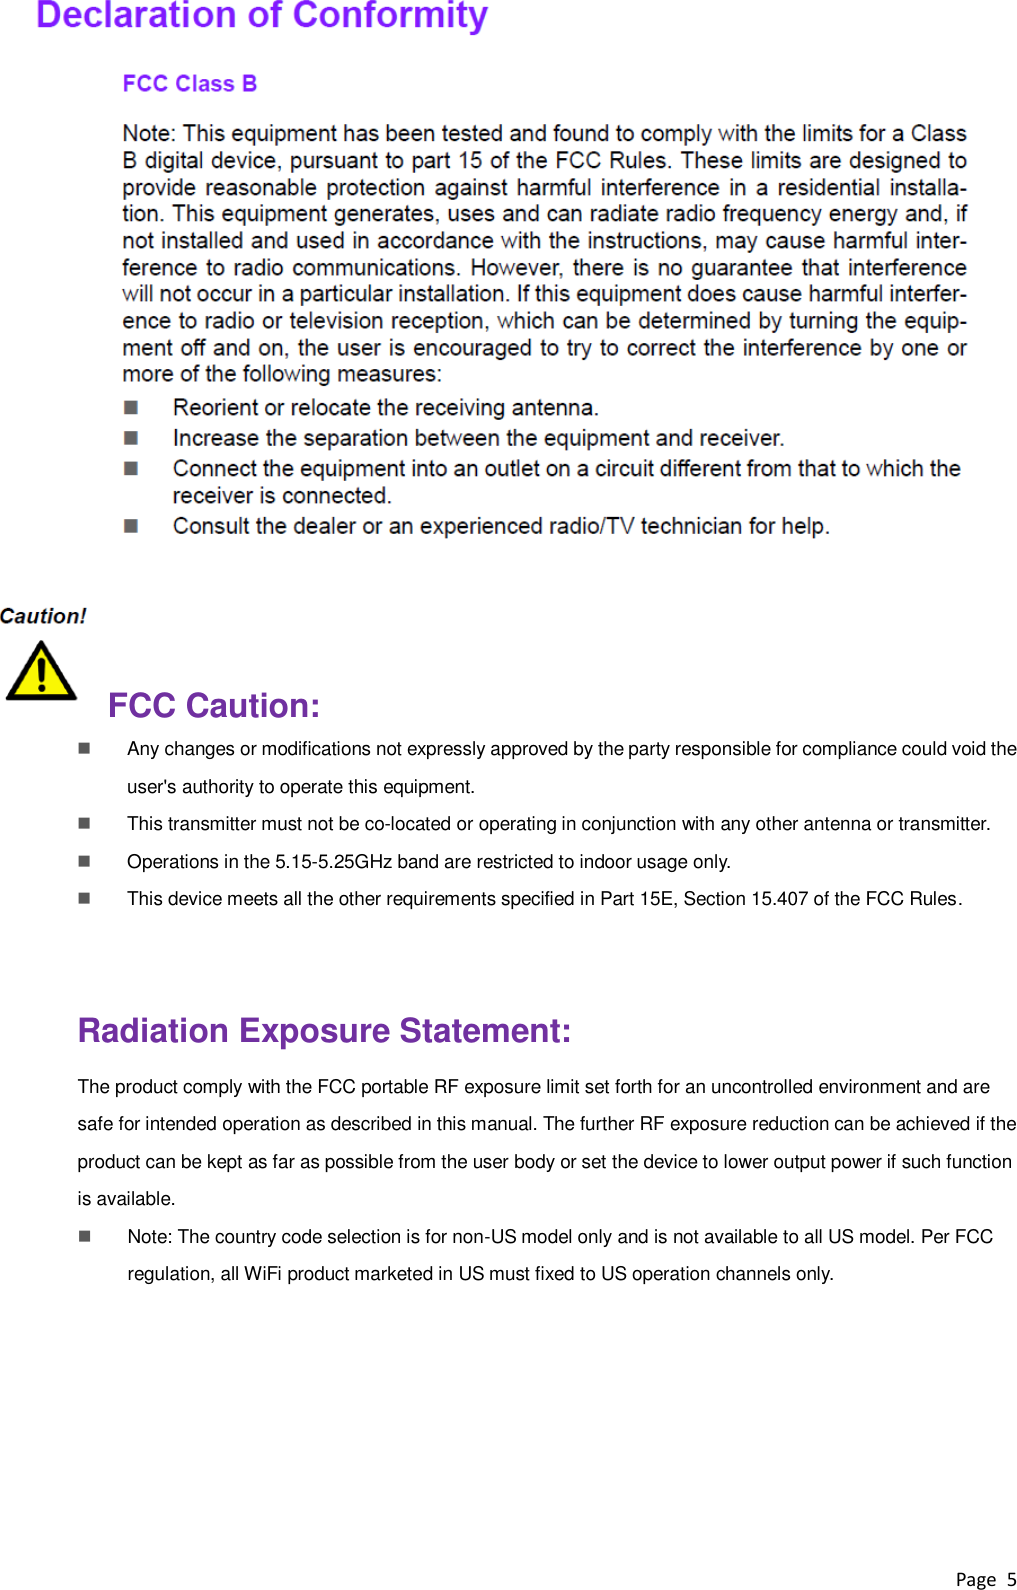 Page  5      FCC Caution:  Any changes or modifications not expressly approved by the party responsible for compliance could void the user&apos;s authority to operate this equipment.     This transmitter must not be co-located or operating in conjunction with any other antenna or transmitter.  Operations in the 5.15-5.25GHz band are restricted to indoor usage only.    This device meets all the other requirements specified in Part 15E, Section 15.407 of the FCC Rules.    Radiation Exposure Statement: The product comply with the FCC portable RF exposure limit set forth for an uncontrolled environment and are safe for intended operation as described in this manual. The further RF exposure reduction can be achieved if the product can be kept as far as possible from the user body or set the device to lower output power if such function is available.  Note: The country code selection is for non-US model only and is not available to all US model. Per FCC regulation, all WiFi product marketed in US must fixed to US operation channels only.    